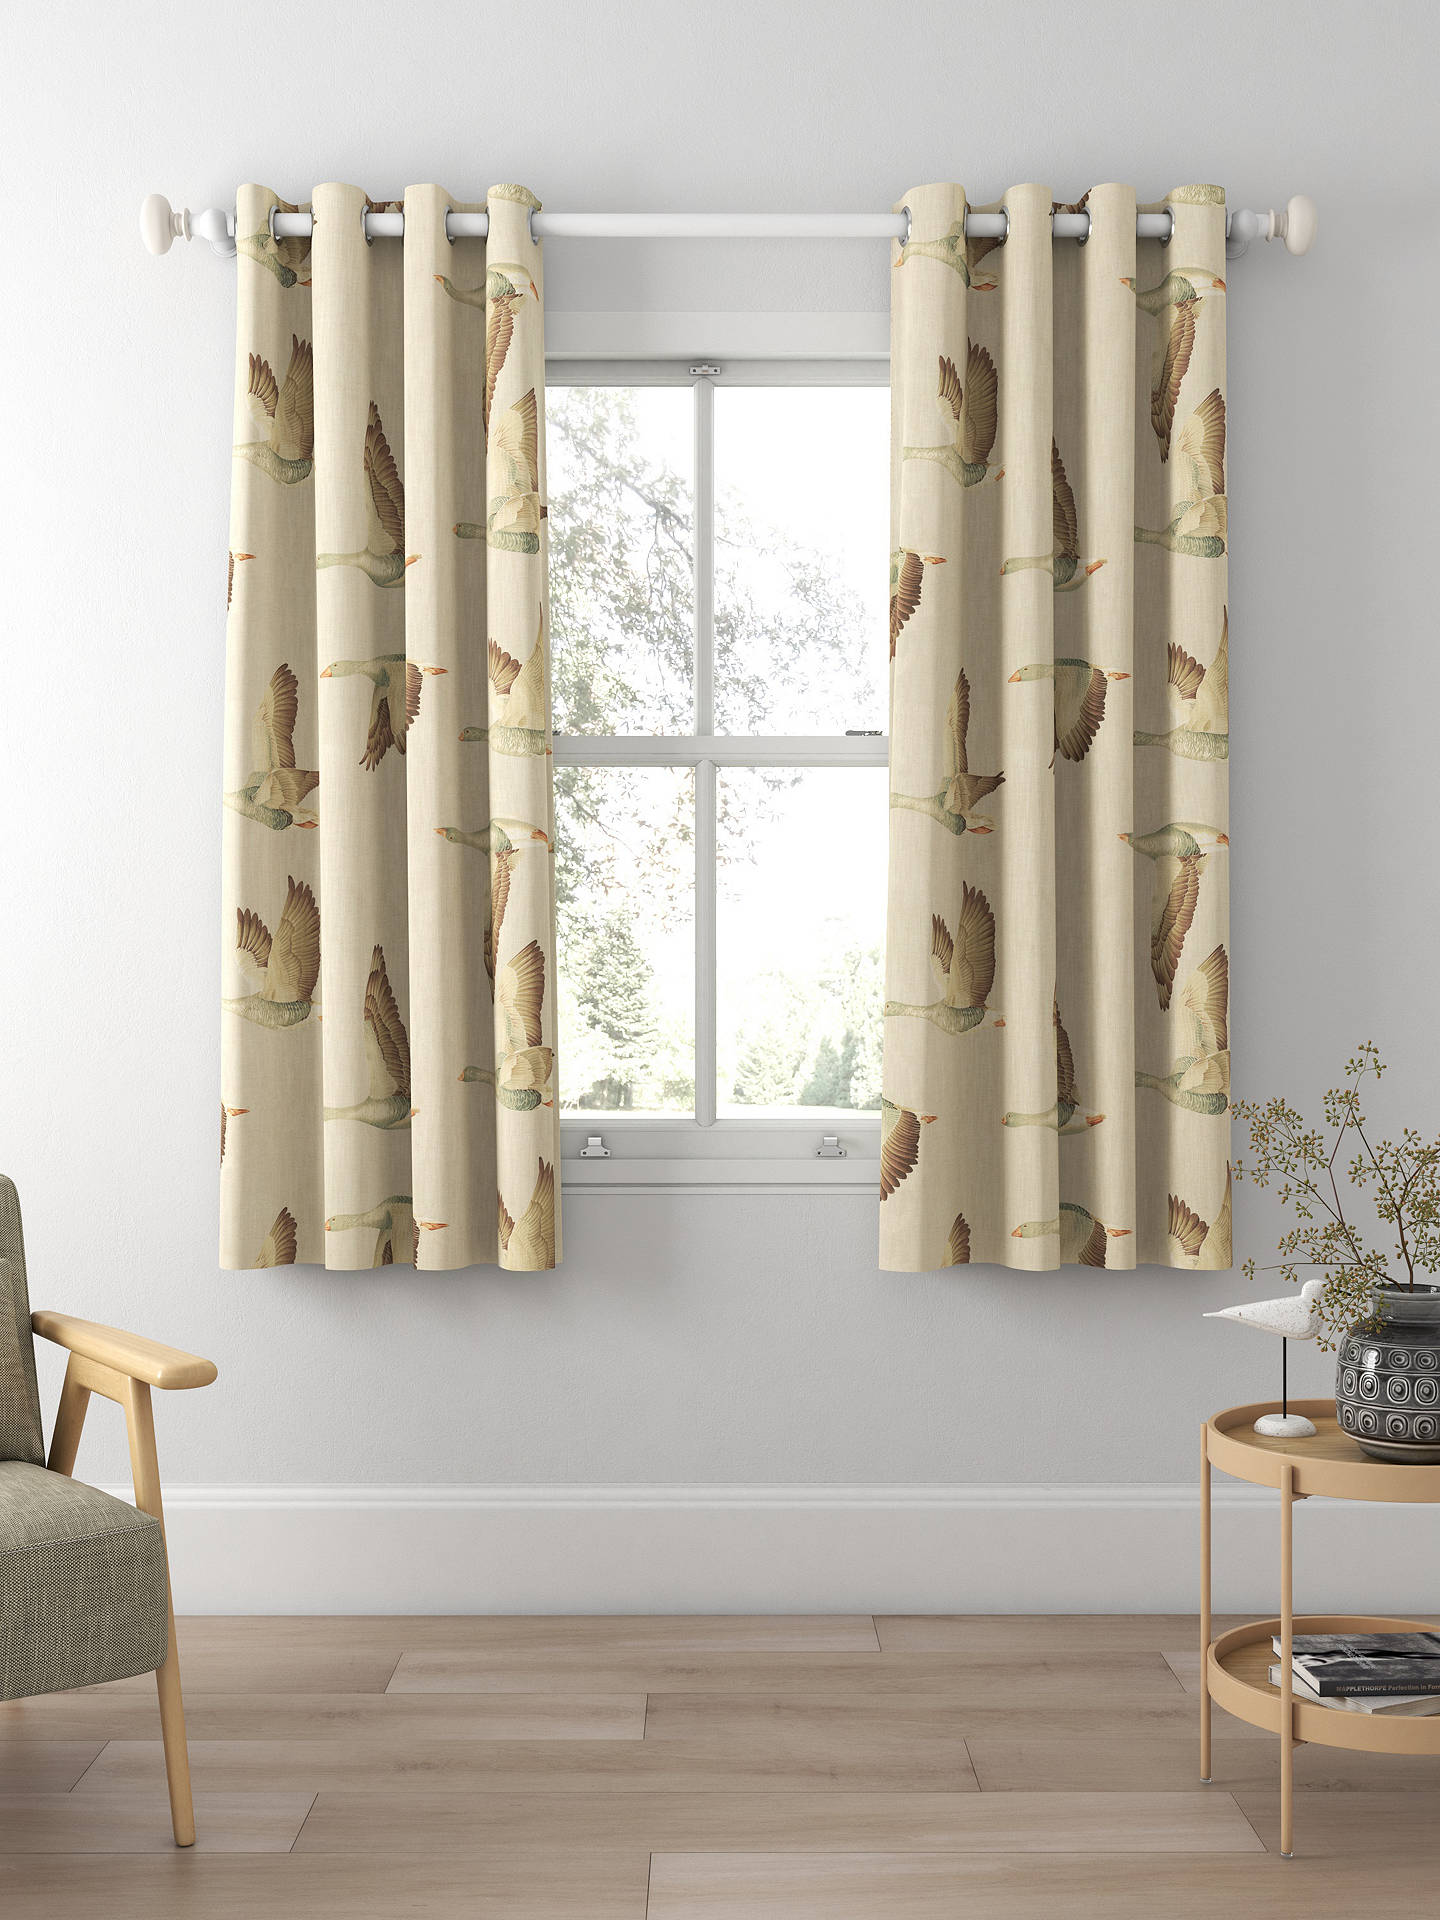 Sanderson Elysian Geese Made to Measure Curtains, Briarwood